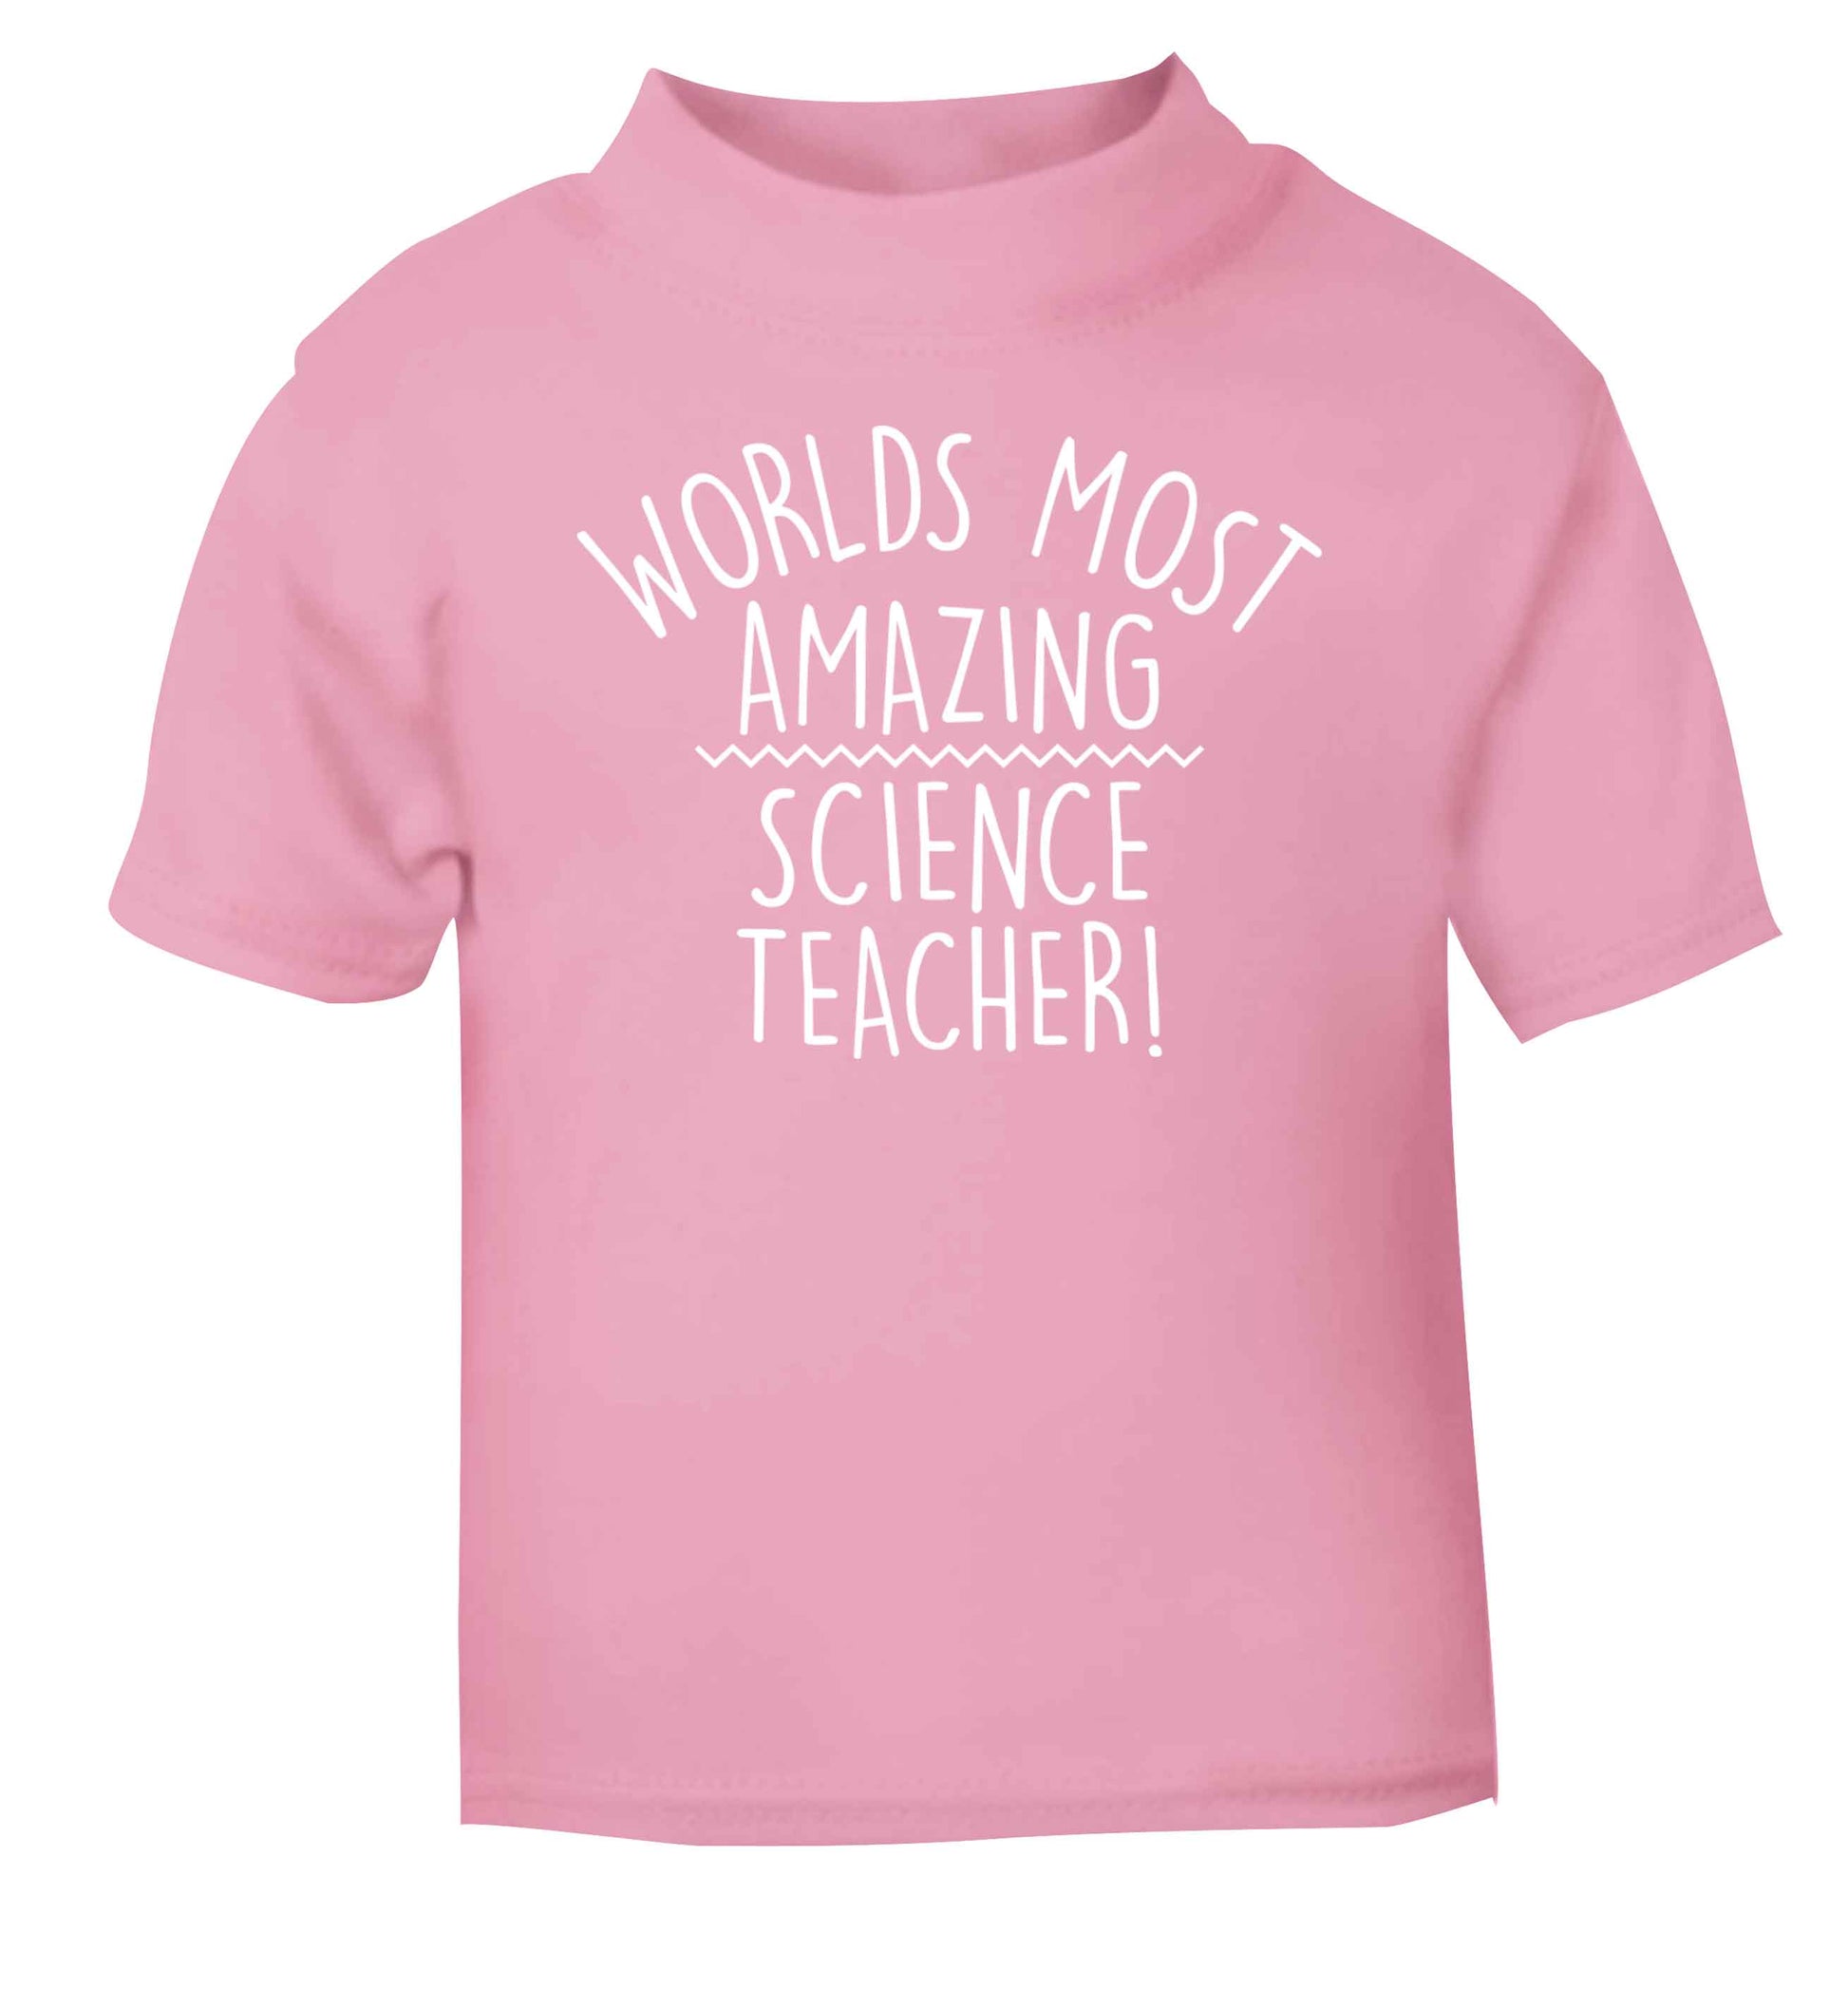 Worlds most amazing science teacher light pink baby toddler Tshirt 2 Years